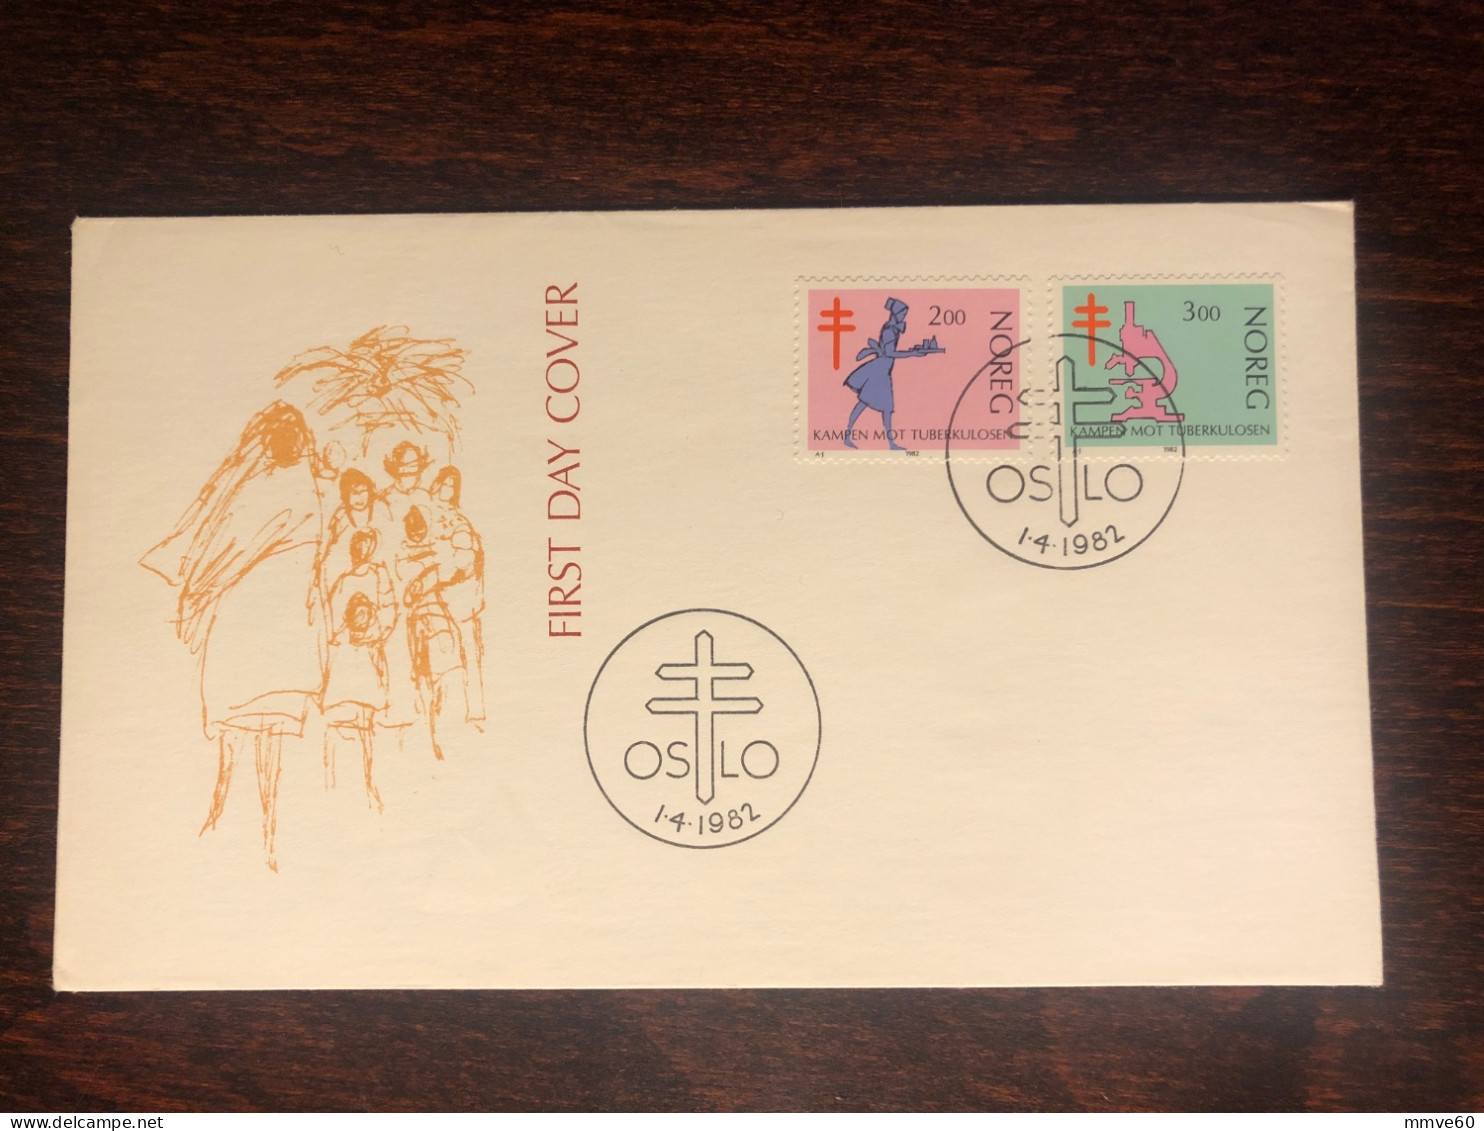 NORWAY FDC COVER 1982 YEAR  TUBERCULOSIS TBC HEALTH MEDICINE STAMPS - FDC